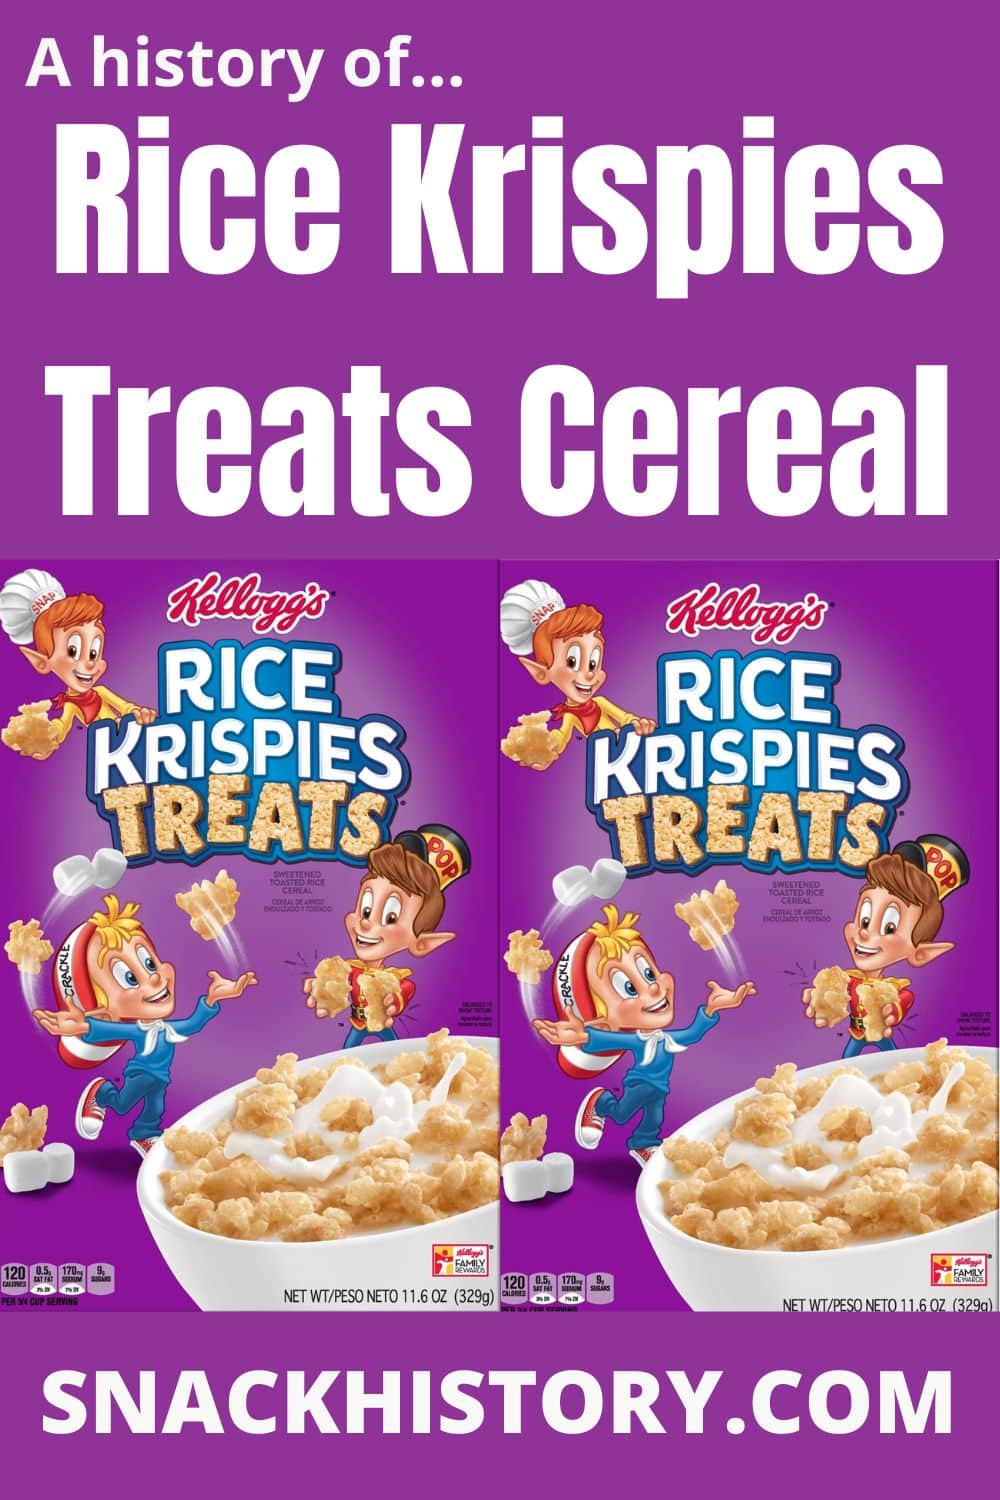 Rice Krispies Treats Cereal - Snack History